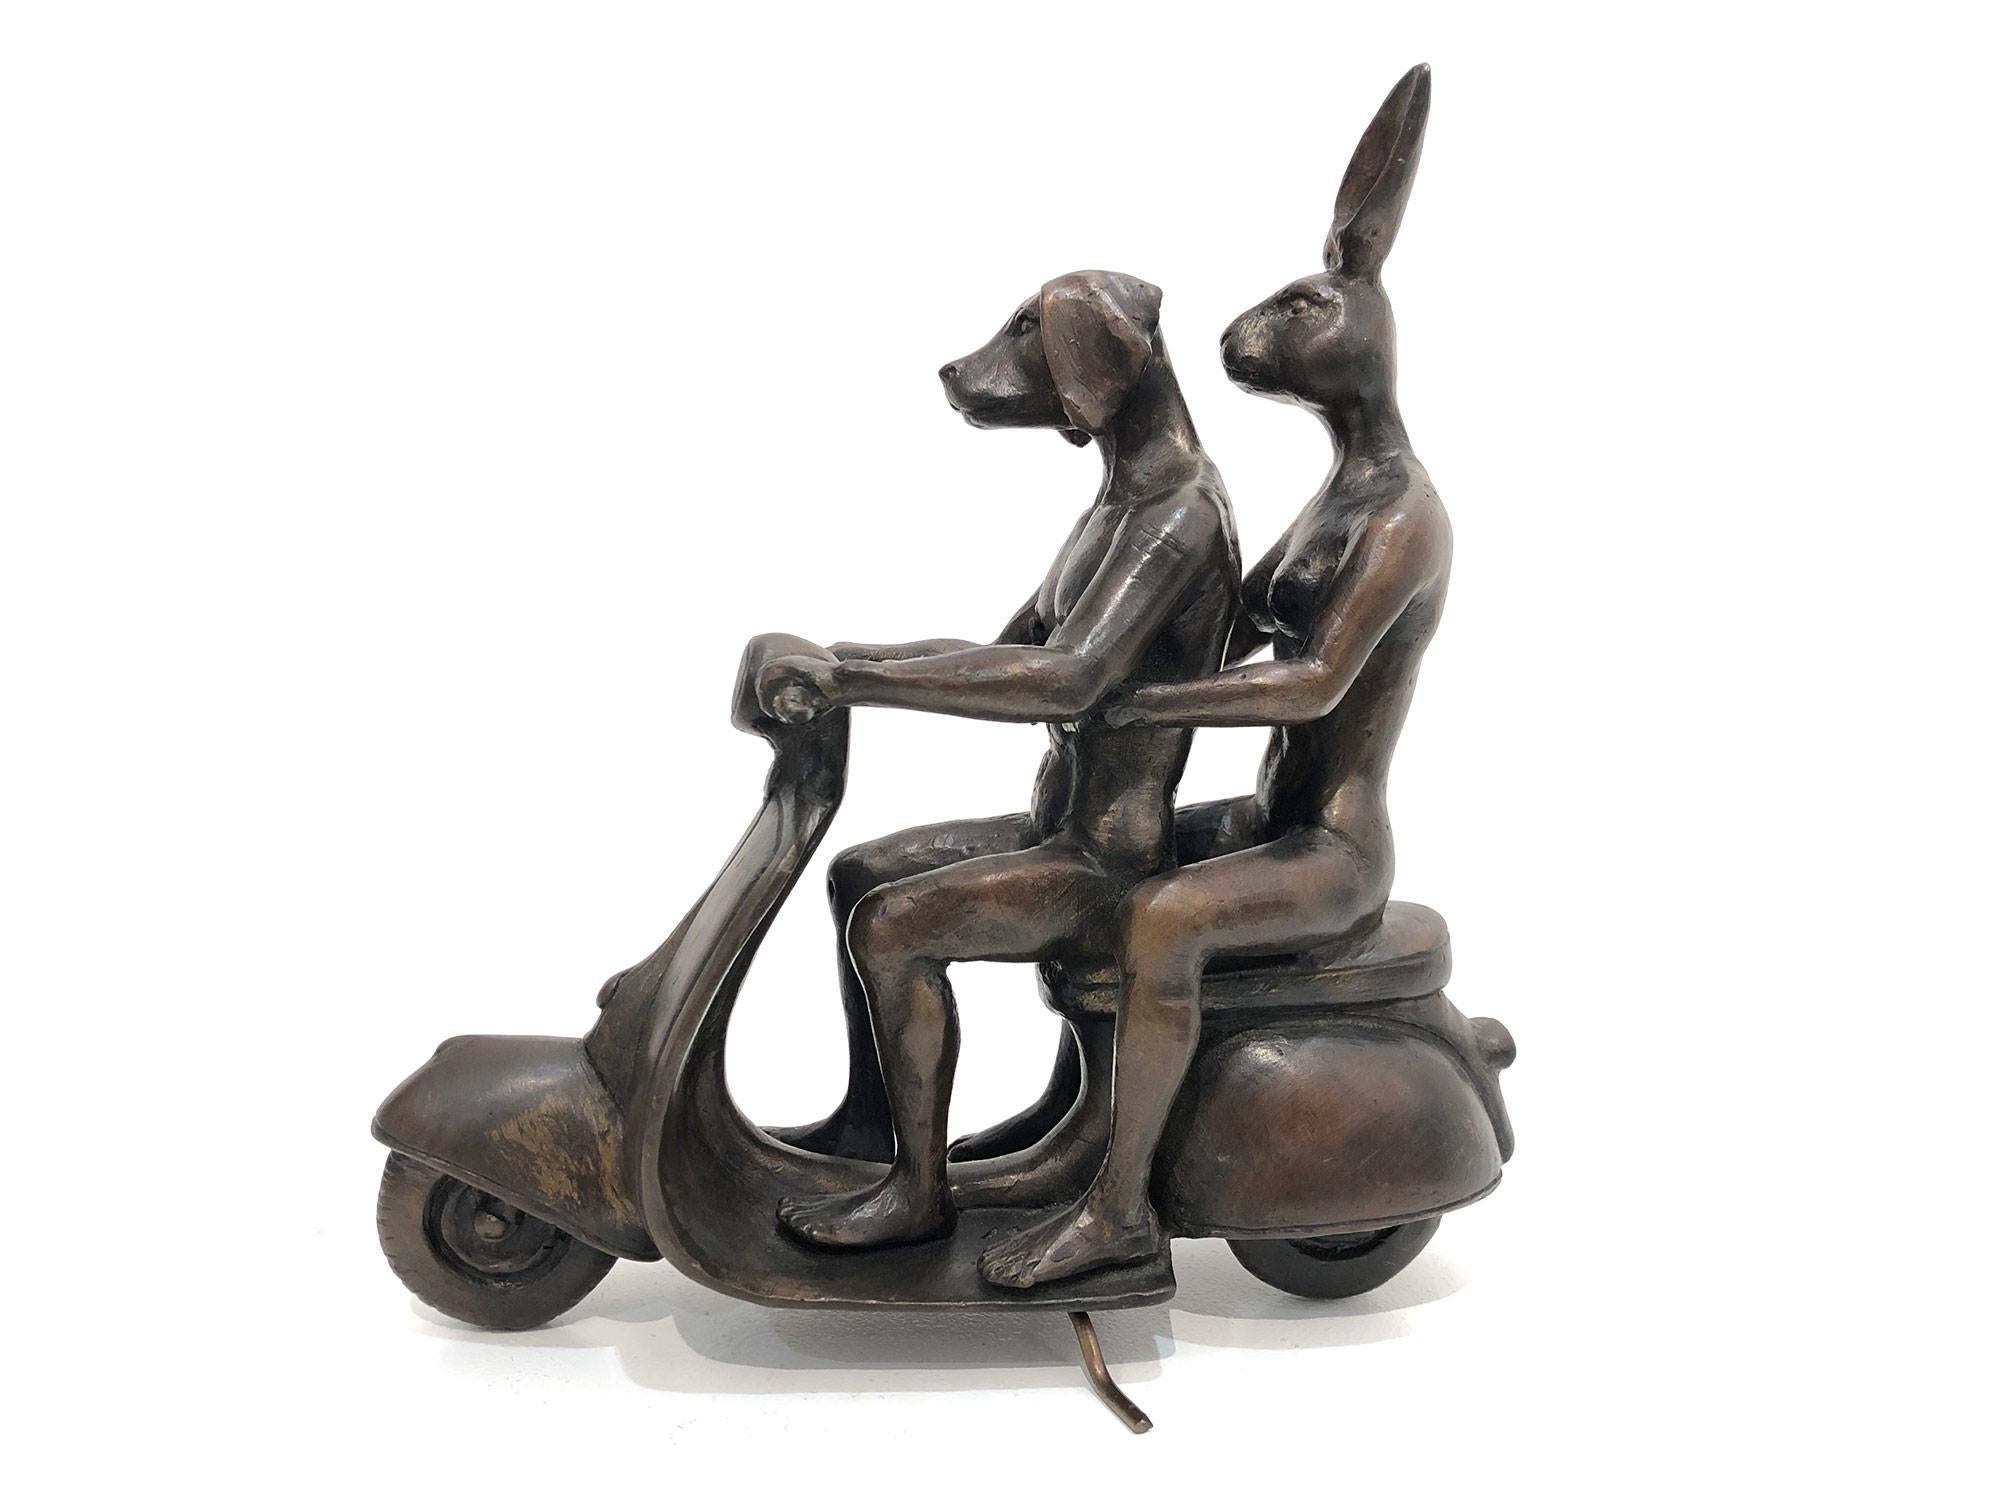 They were the Authentic Vespa Riders in Rome (Bronze with Deep Bronze Patina) - Sculpture by Gillie and Marc Schattner